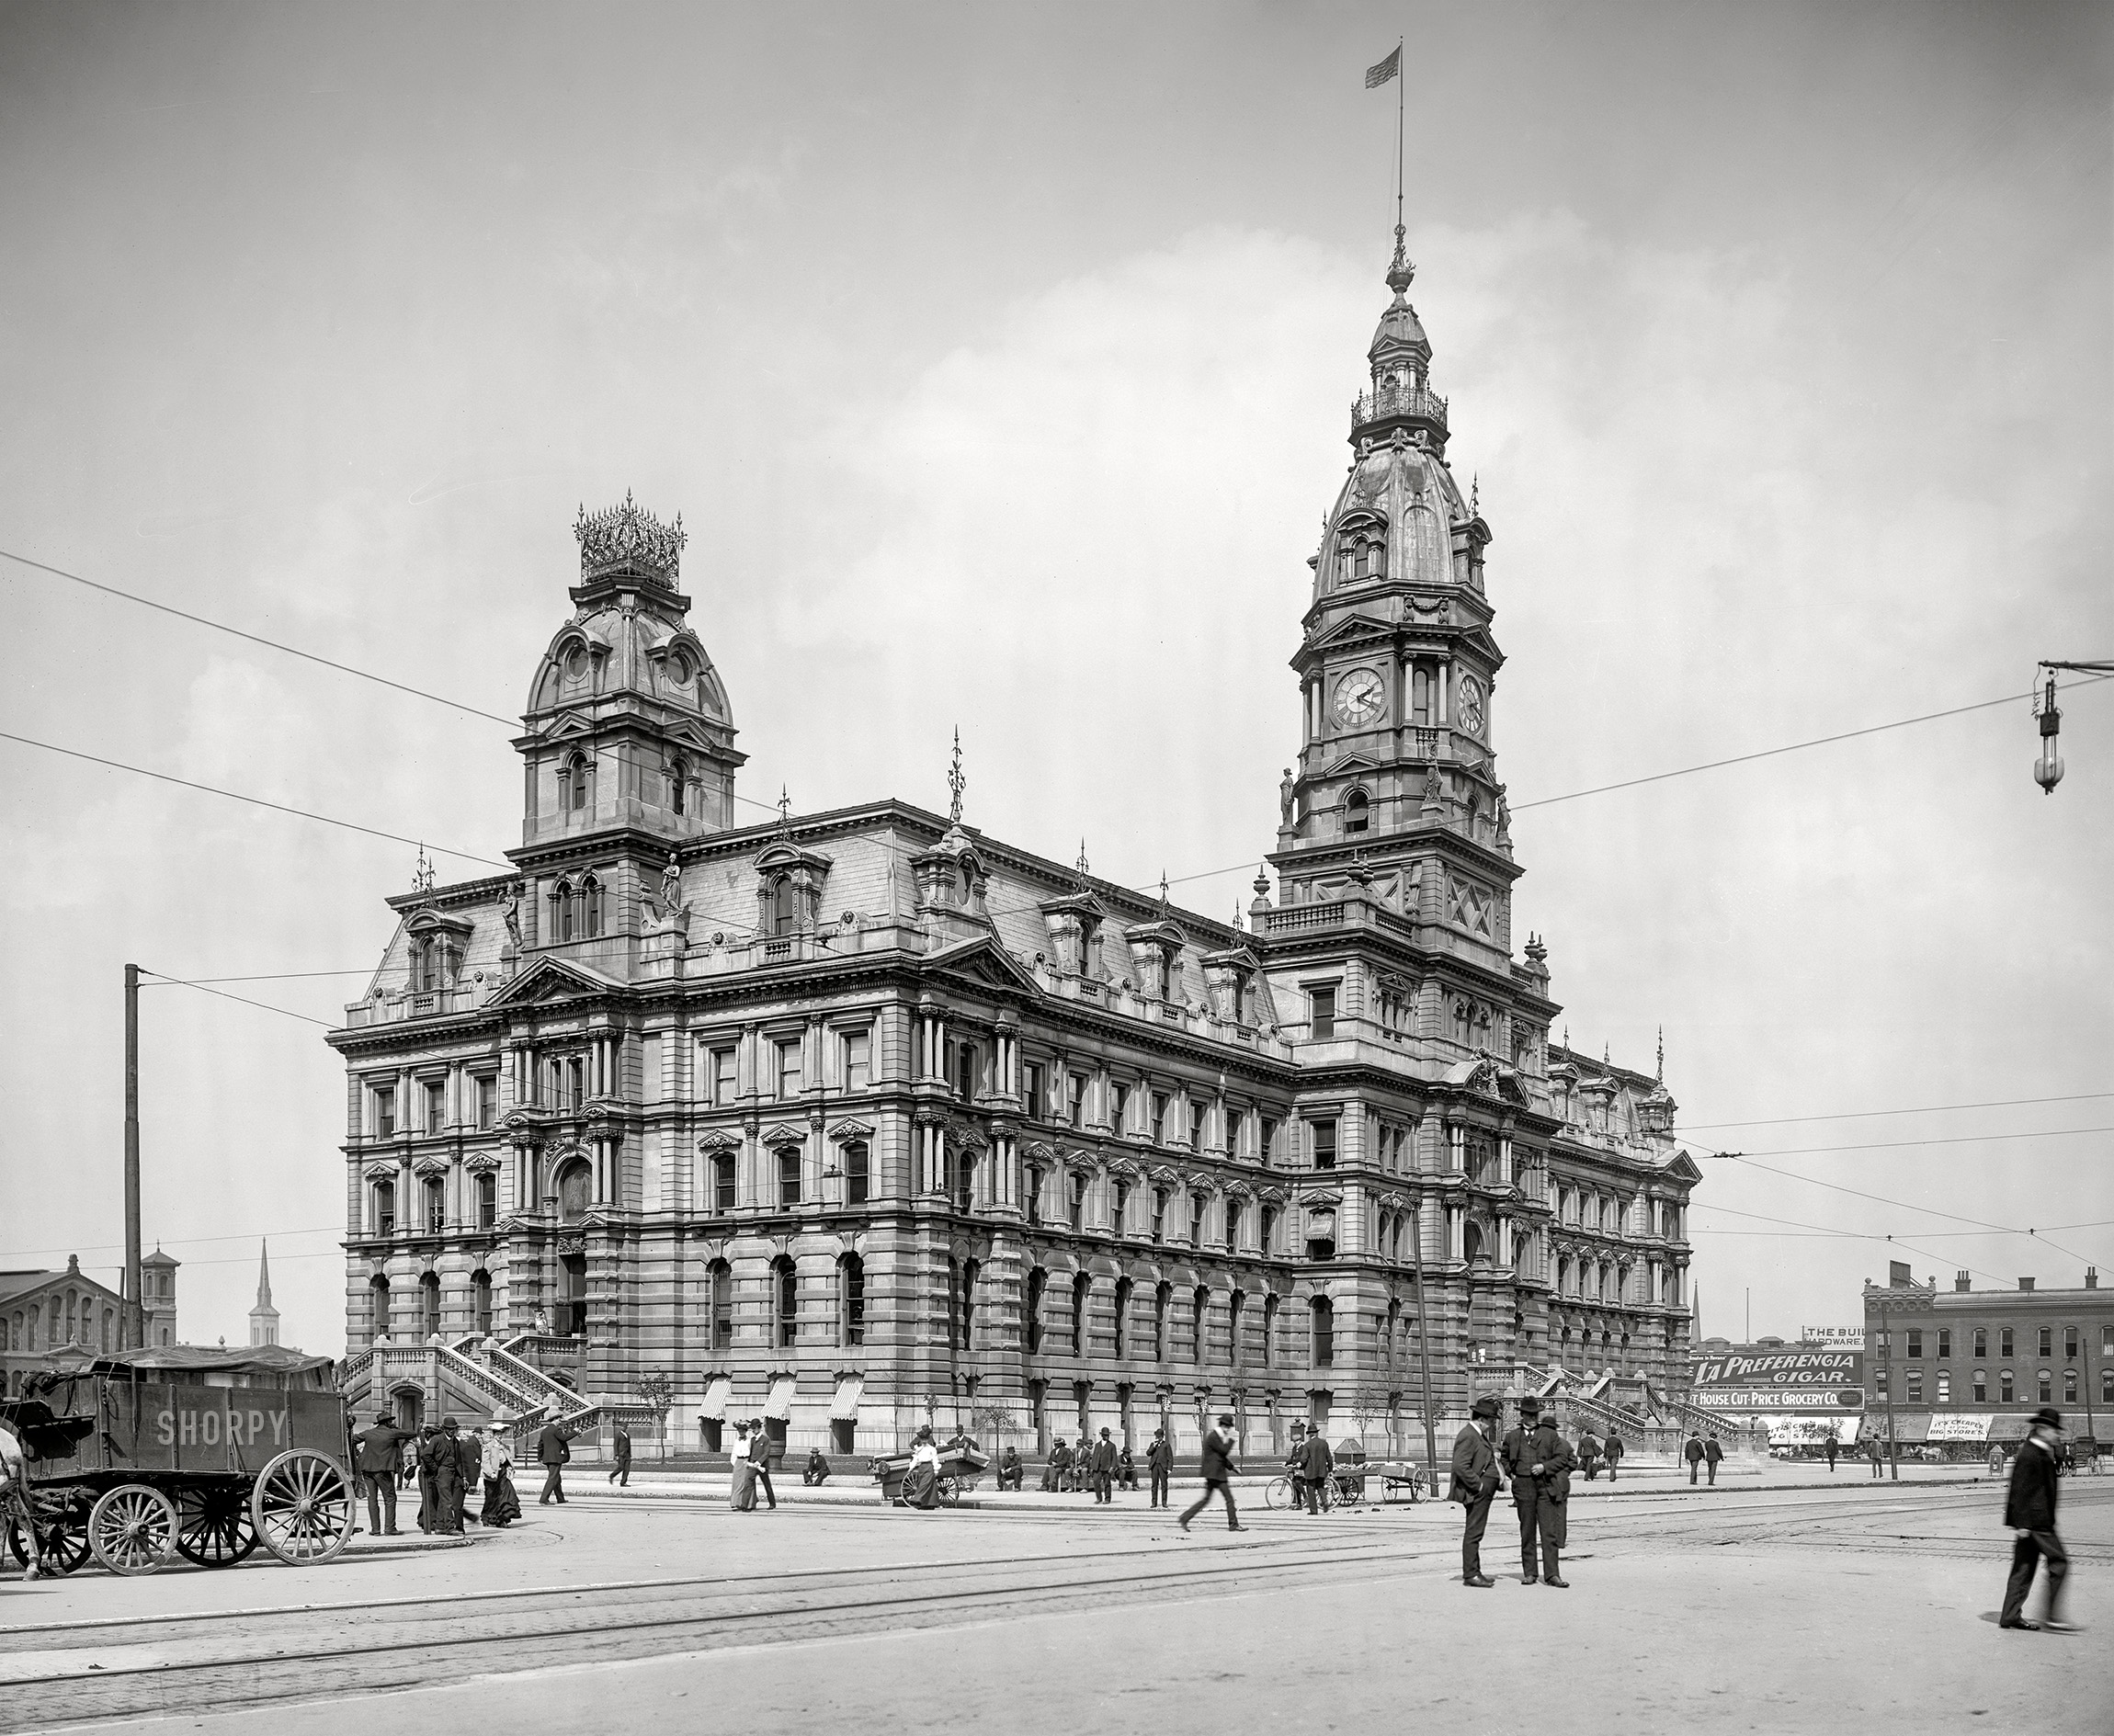 1904. "Marion County Courthouse -- Indianapolis, Indiana." This Second Empire colossus met its Waterloo in 1962. 8x10 inch glass negative, Detroit Photographic Co. View full size.